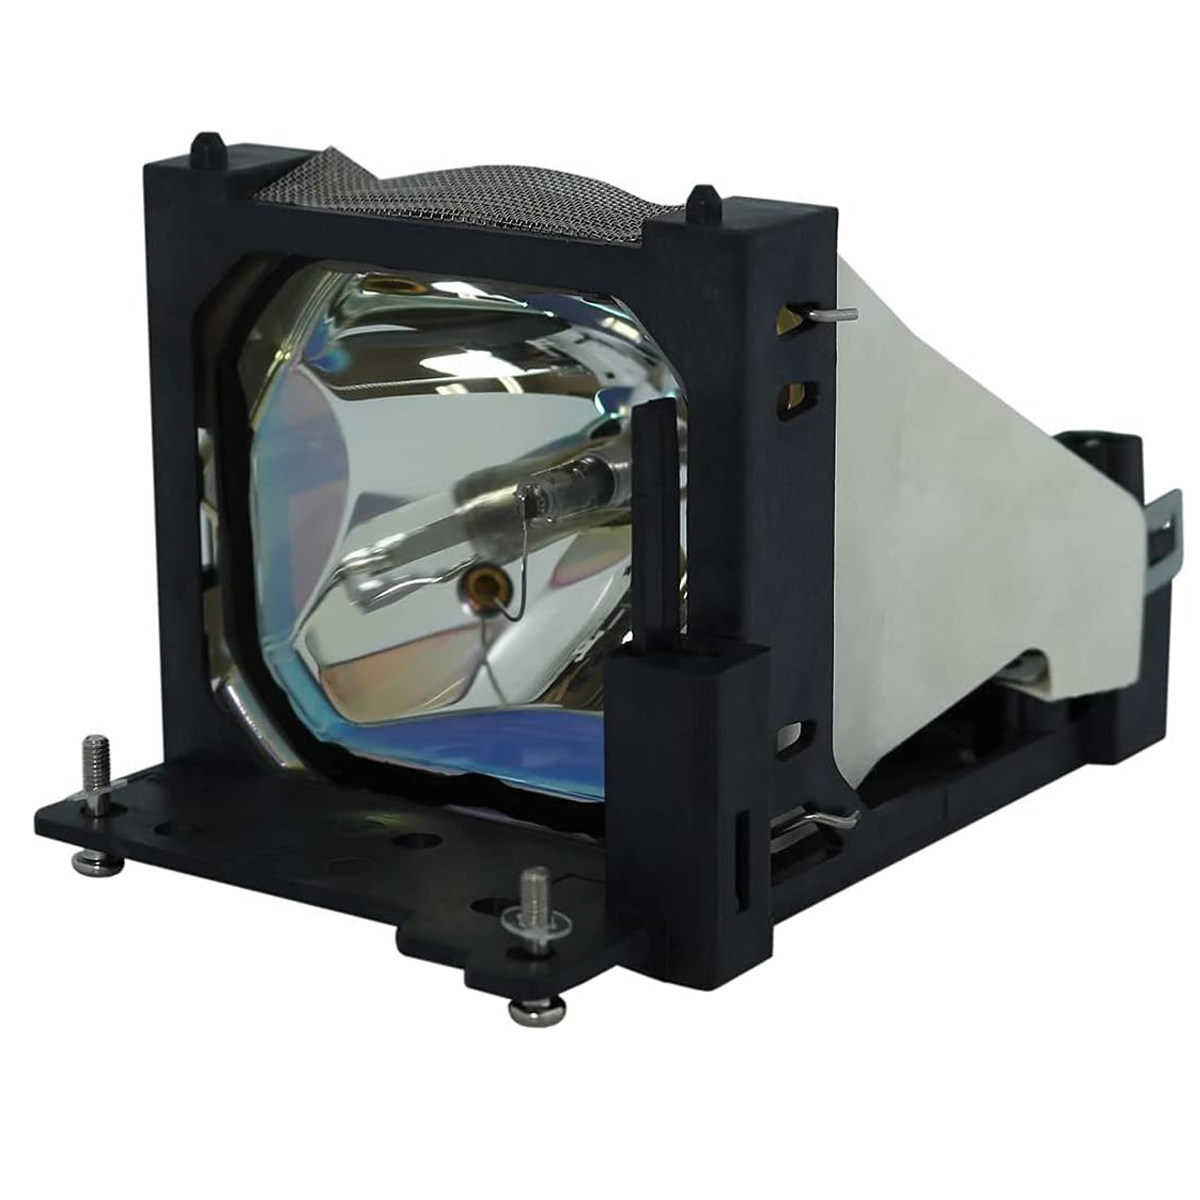 Replacement Projector lamp DT00331 For Hitachi CP-HS2000 CP-S310 CP-S310W CP-X320